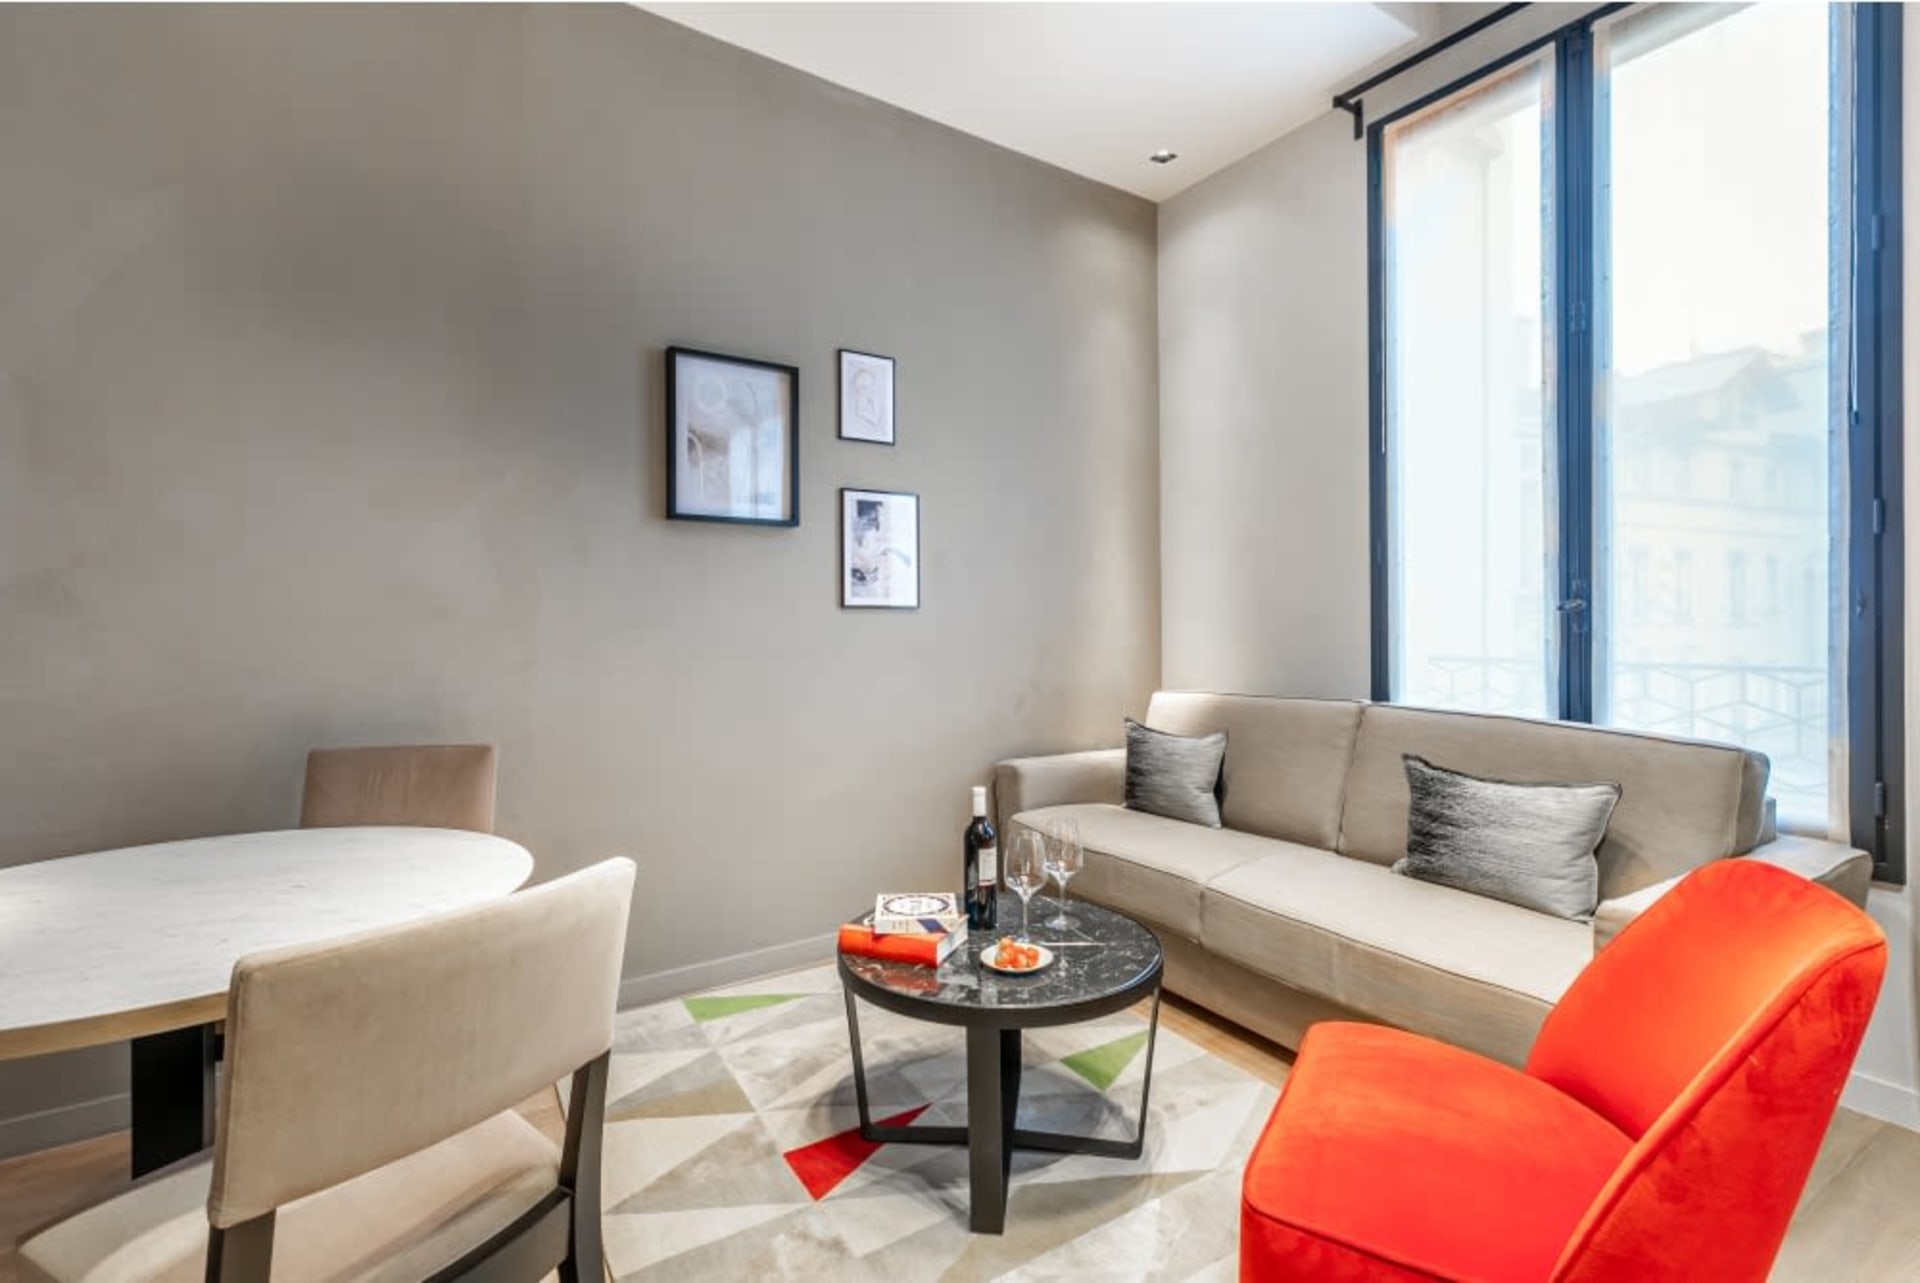 Property Image 2 - Wonderful 1 Bedroom Apartment Ideal Location in Paris